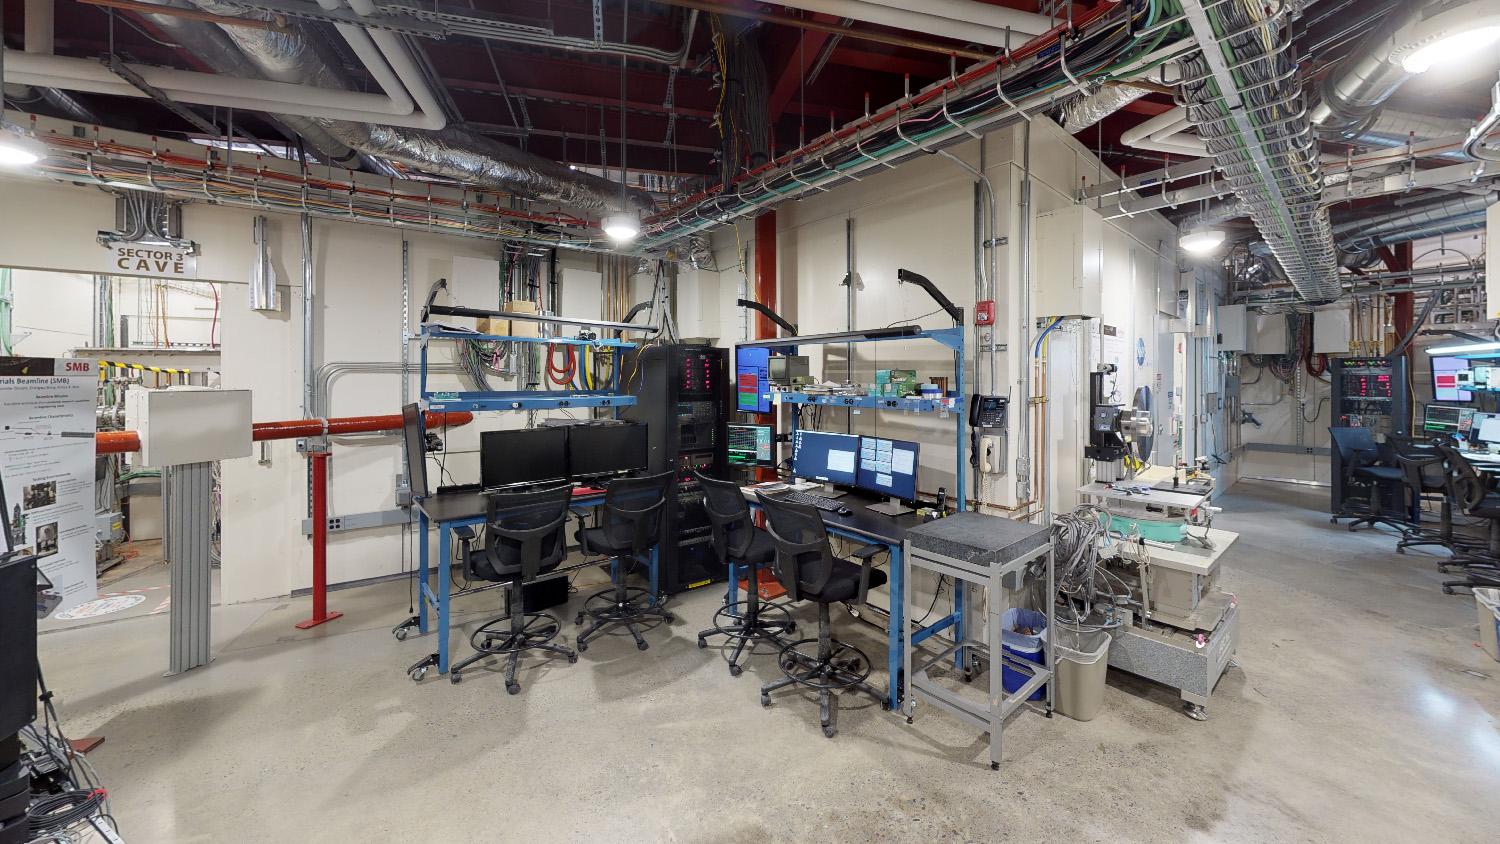 The FMB beamline at CHESS